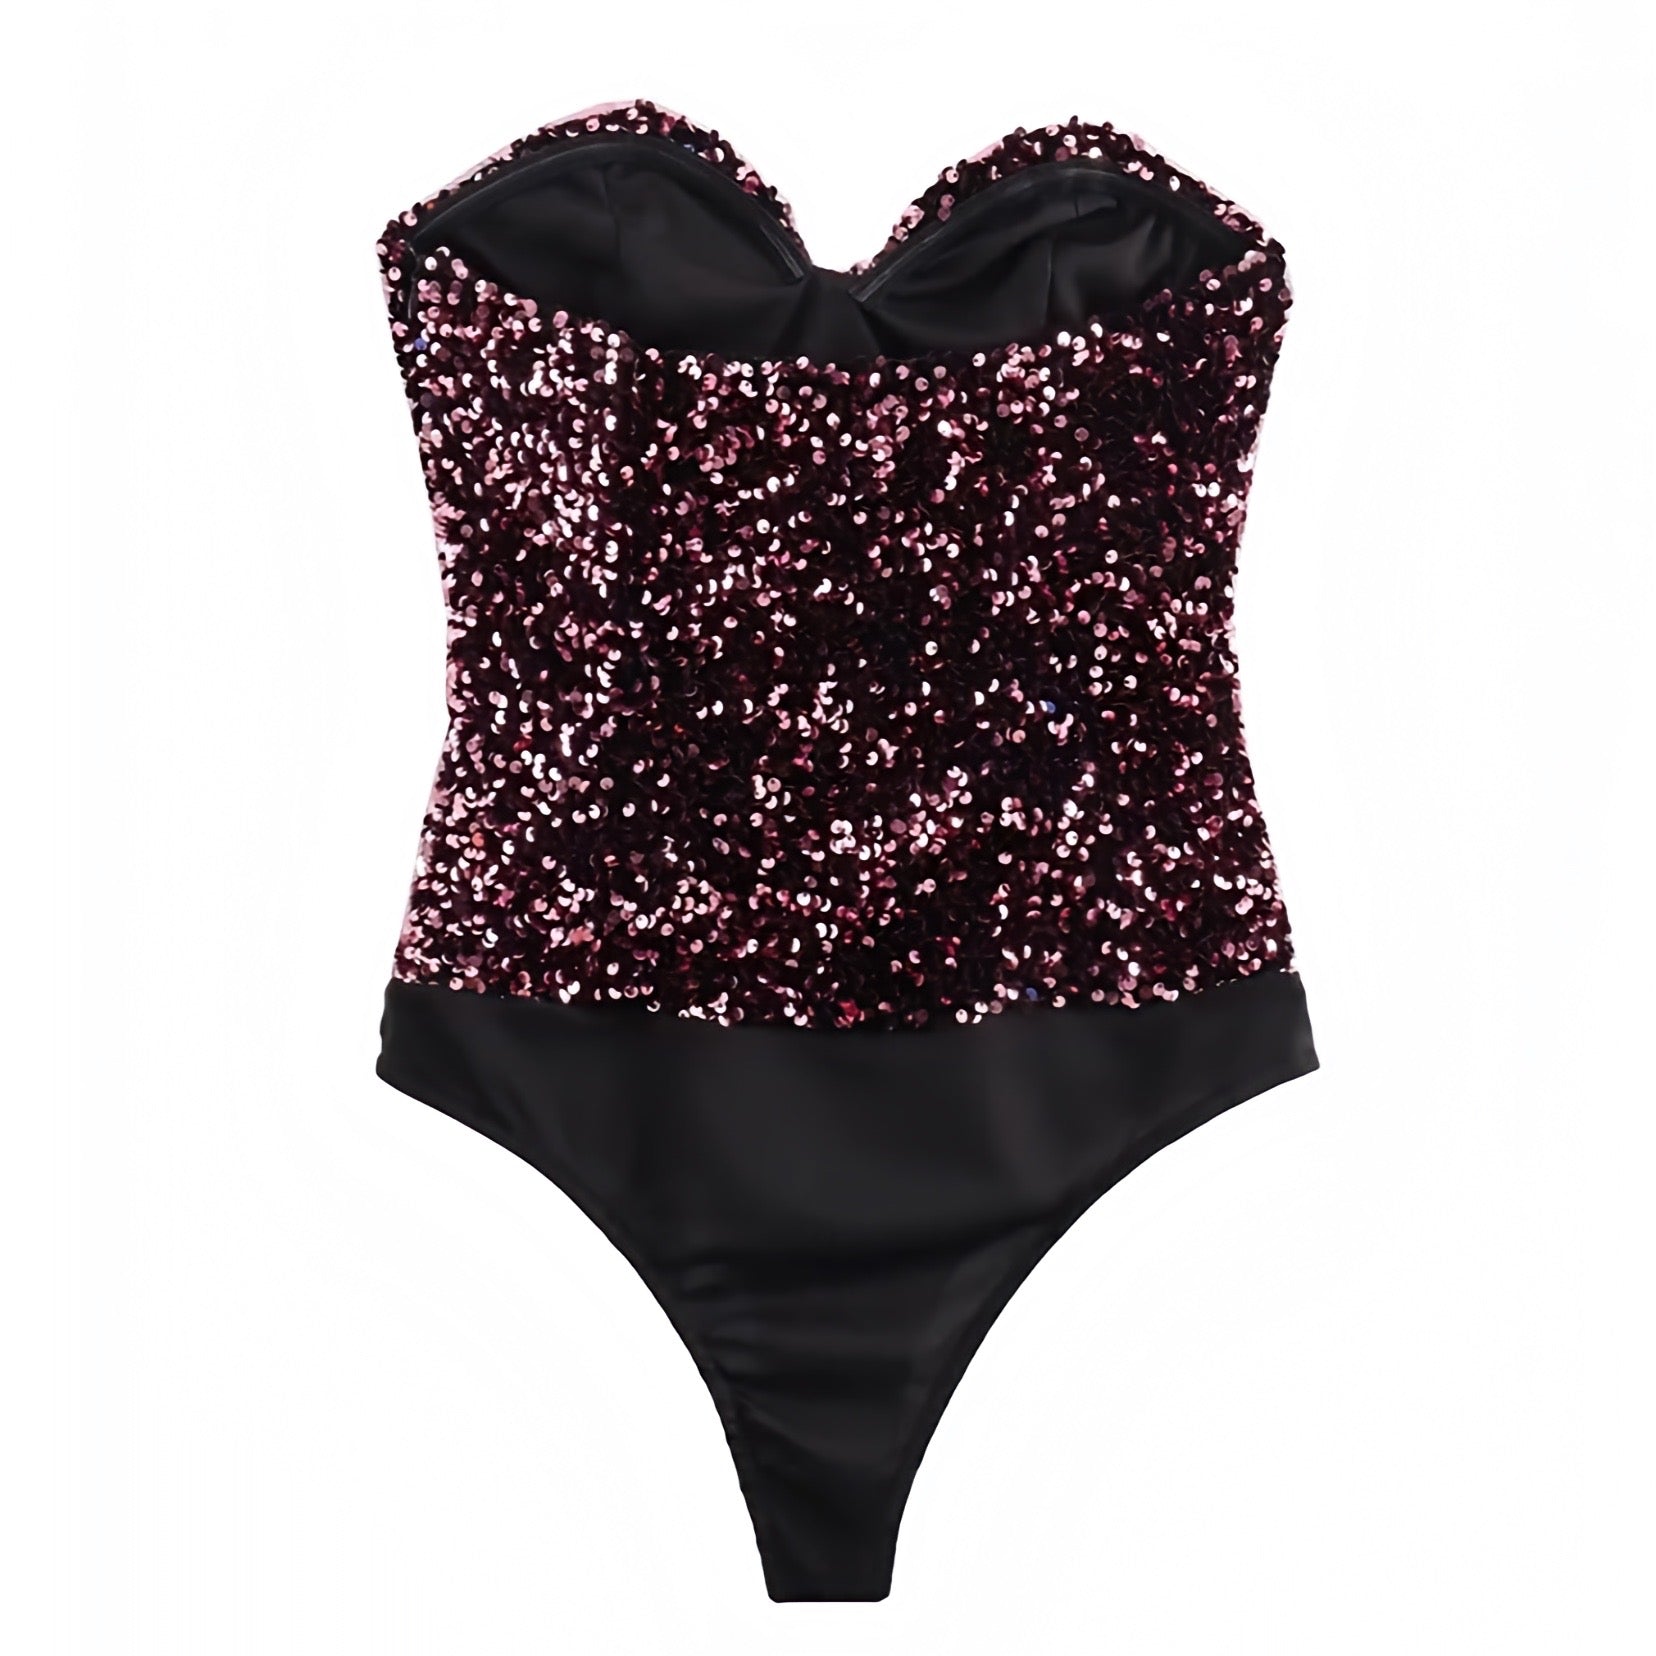 purple-plum-wine-sangria-sequined-glitter-sparkly-slim-fit-corset-bodycon-bustier-fitted-bodice-sweetheart-neckline-strapless-sleeveless-bandeau-one-piece-bodysuit-top-women-ladies-chic-trendy-spring-2024-summer-elegant-casual-semi-formal-feminine-classy-party-gala-date-night-out-sexy-evening-cocktail-club-wear-zara-revolve-aritzia-whitefox-edikted-princess-polly-iamgia-areyouami